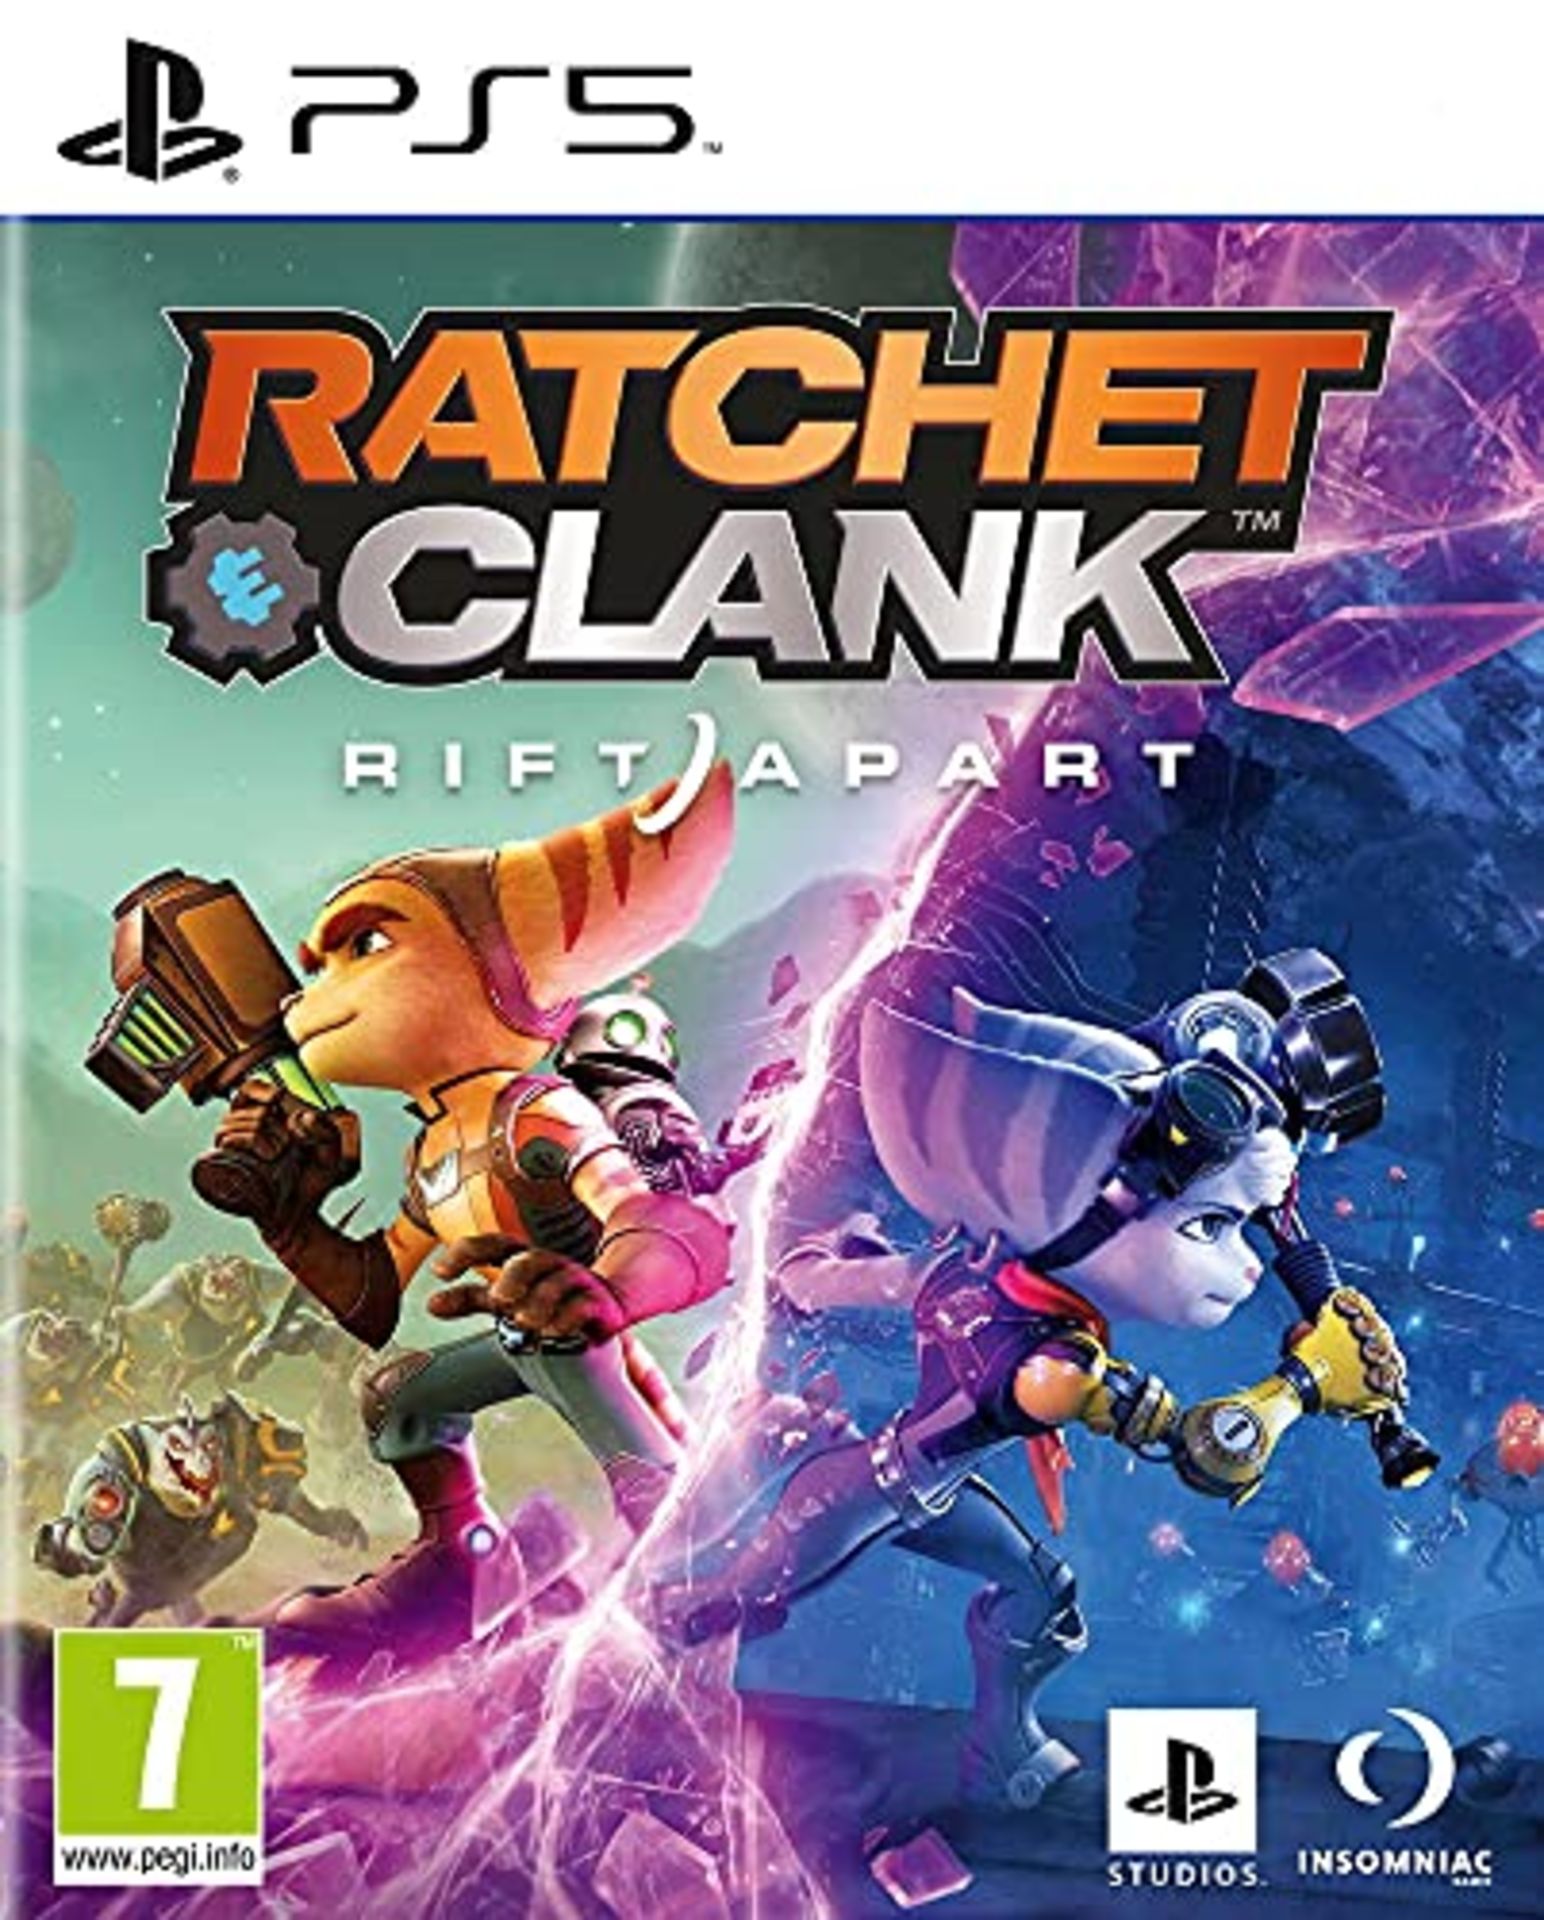 RRP £54.00 Sony, Ratchet & Clank: Rift Apart for PS5, Platform and Adventure game, Standard Editi